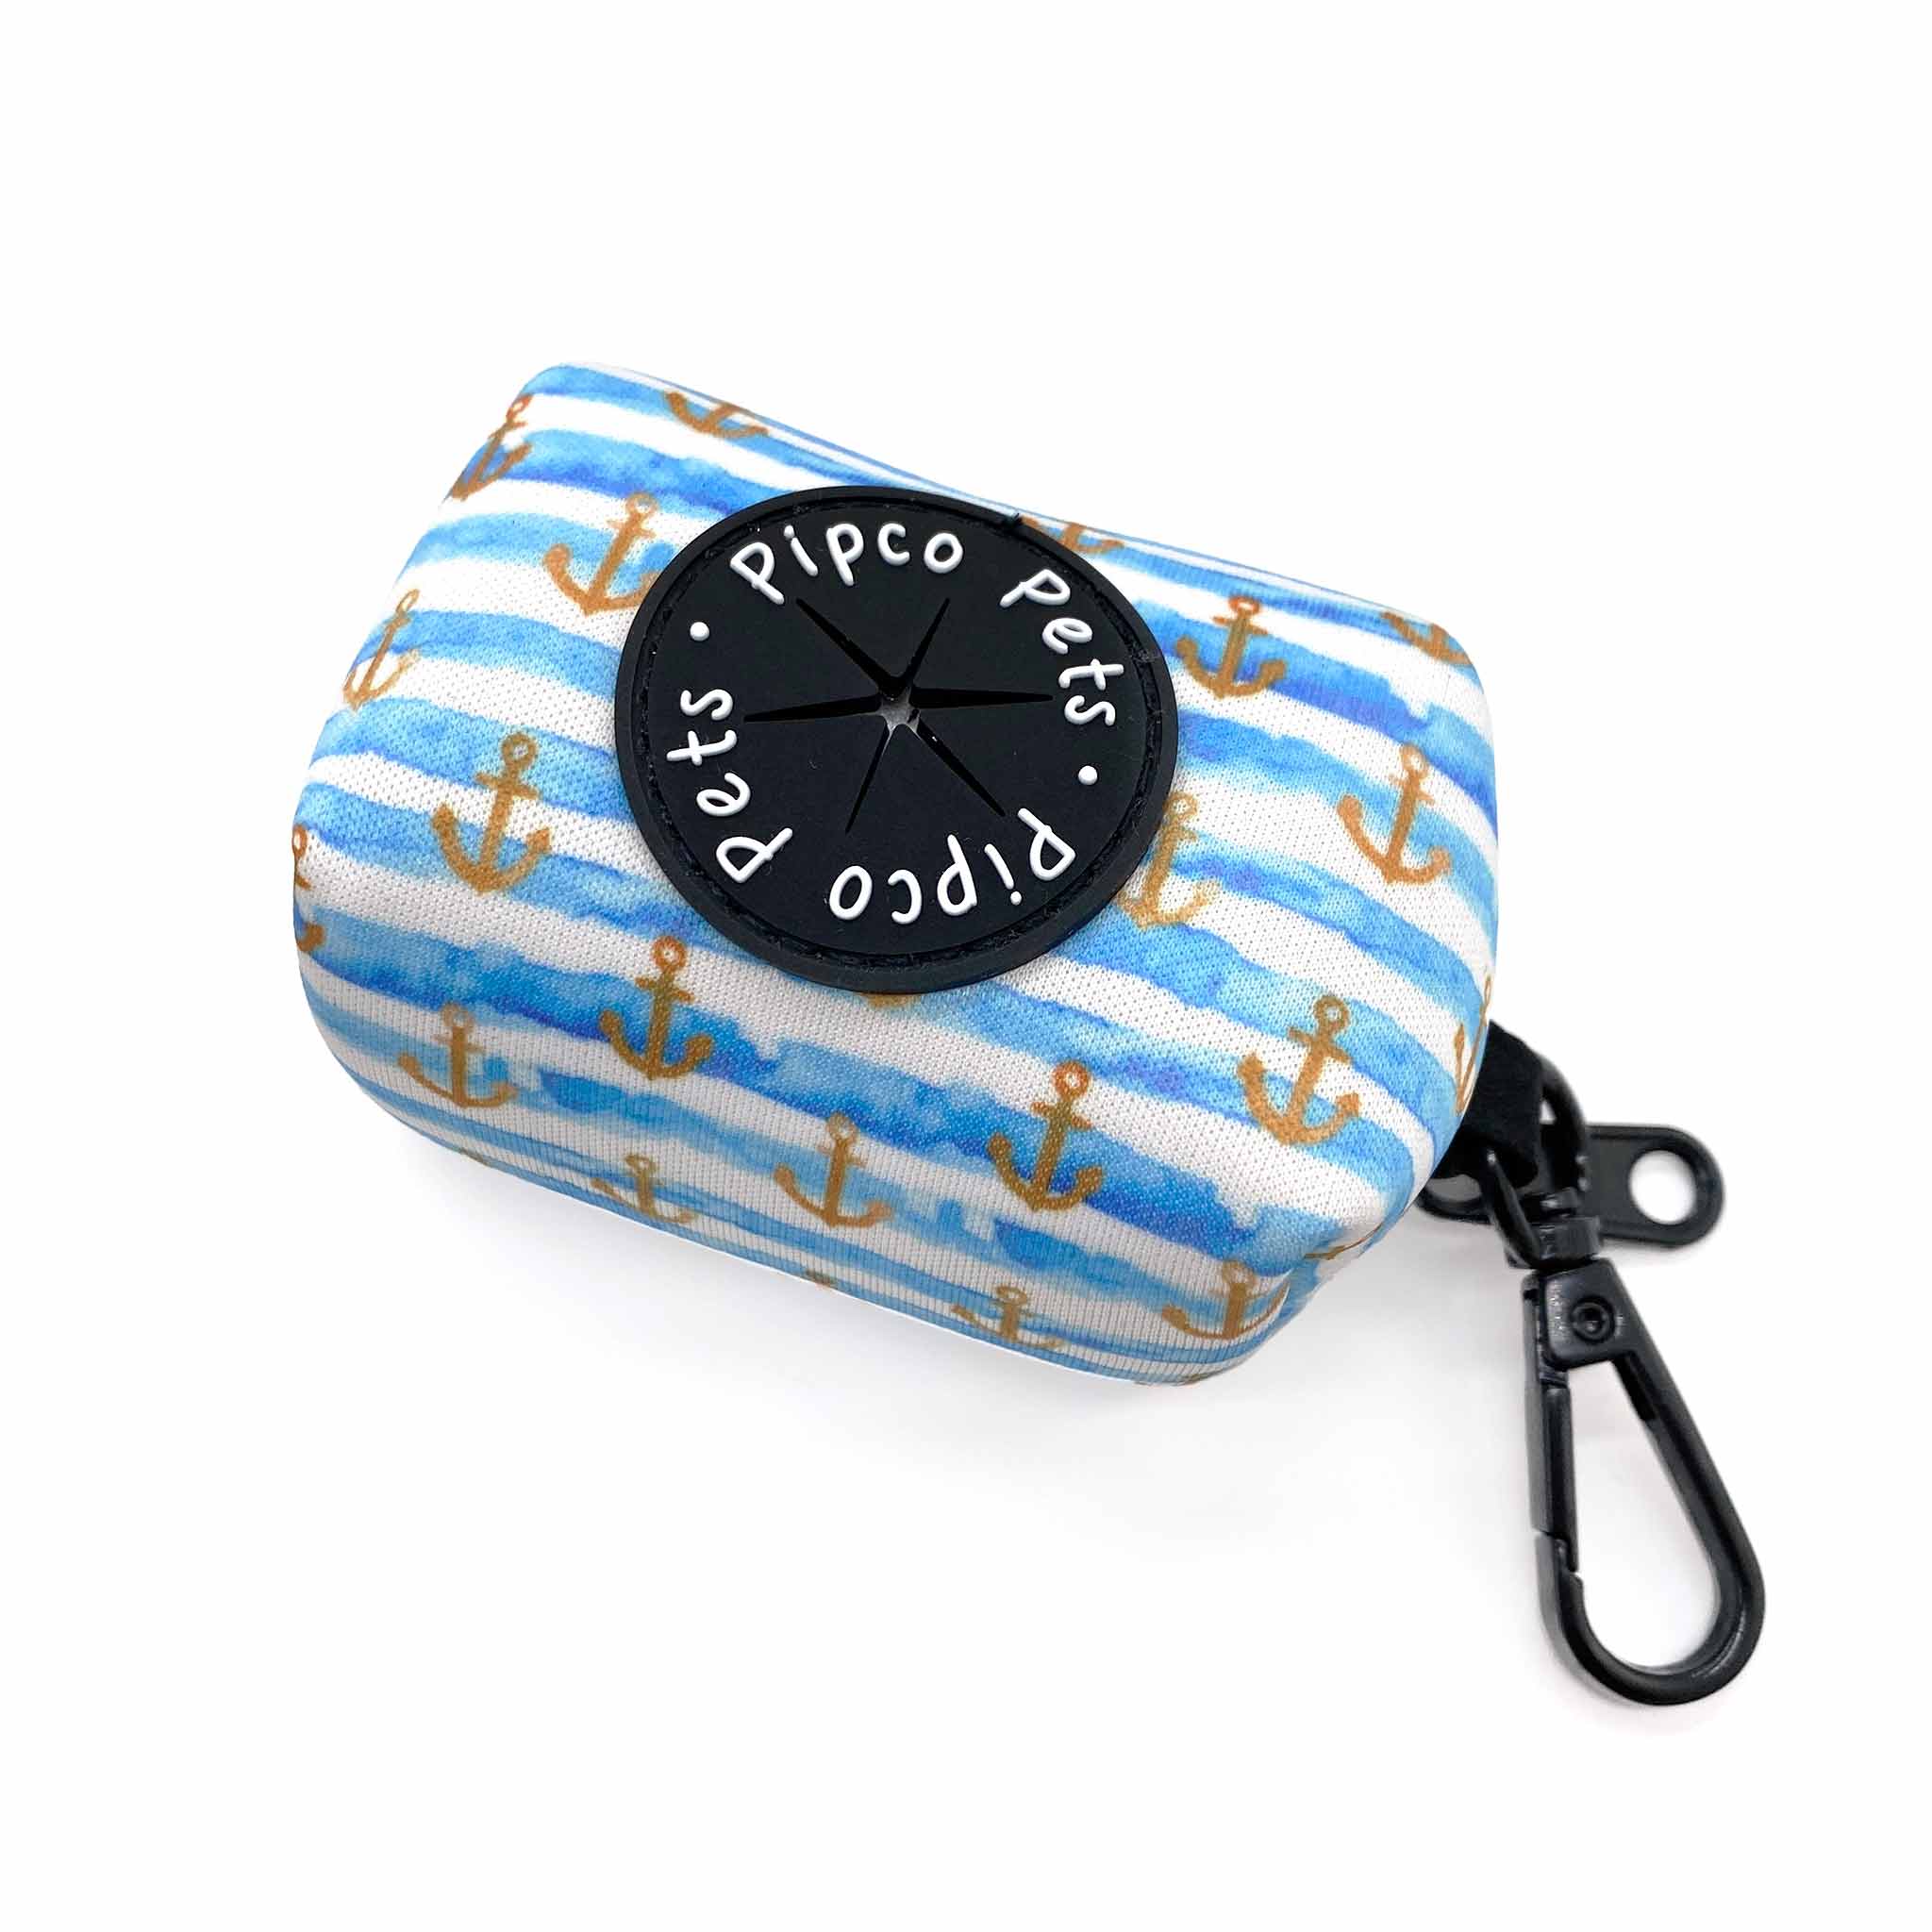 Pipco Pets dog poo bag holder with Pipco Pets anchors print pattern in blue